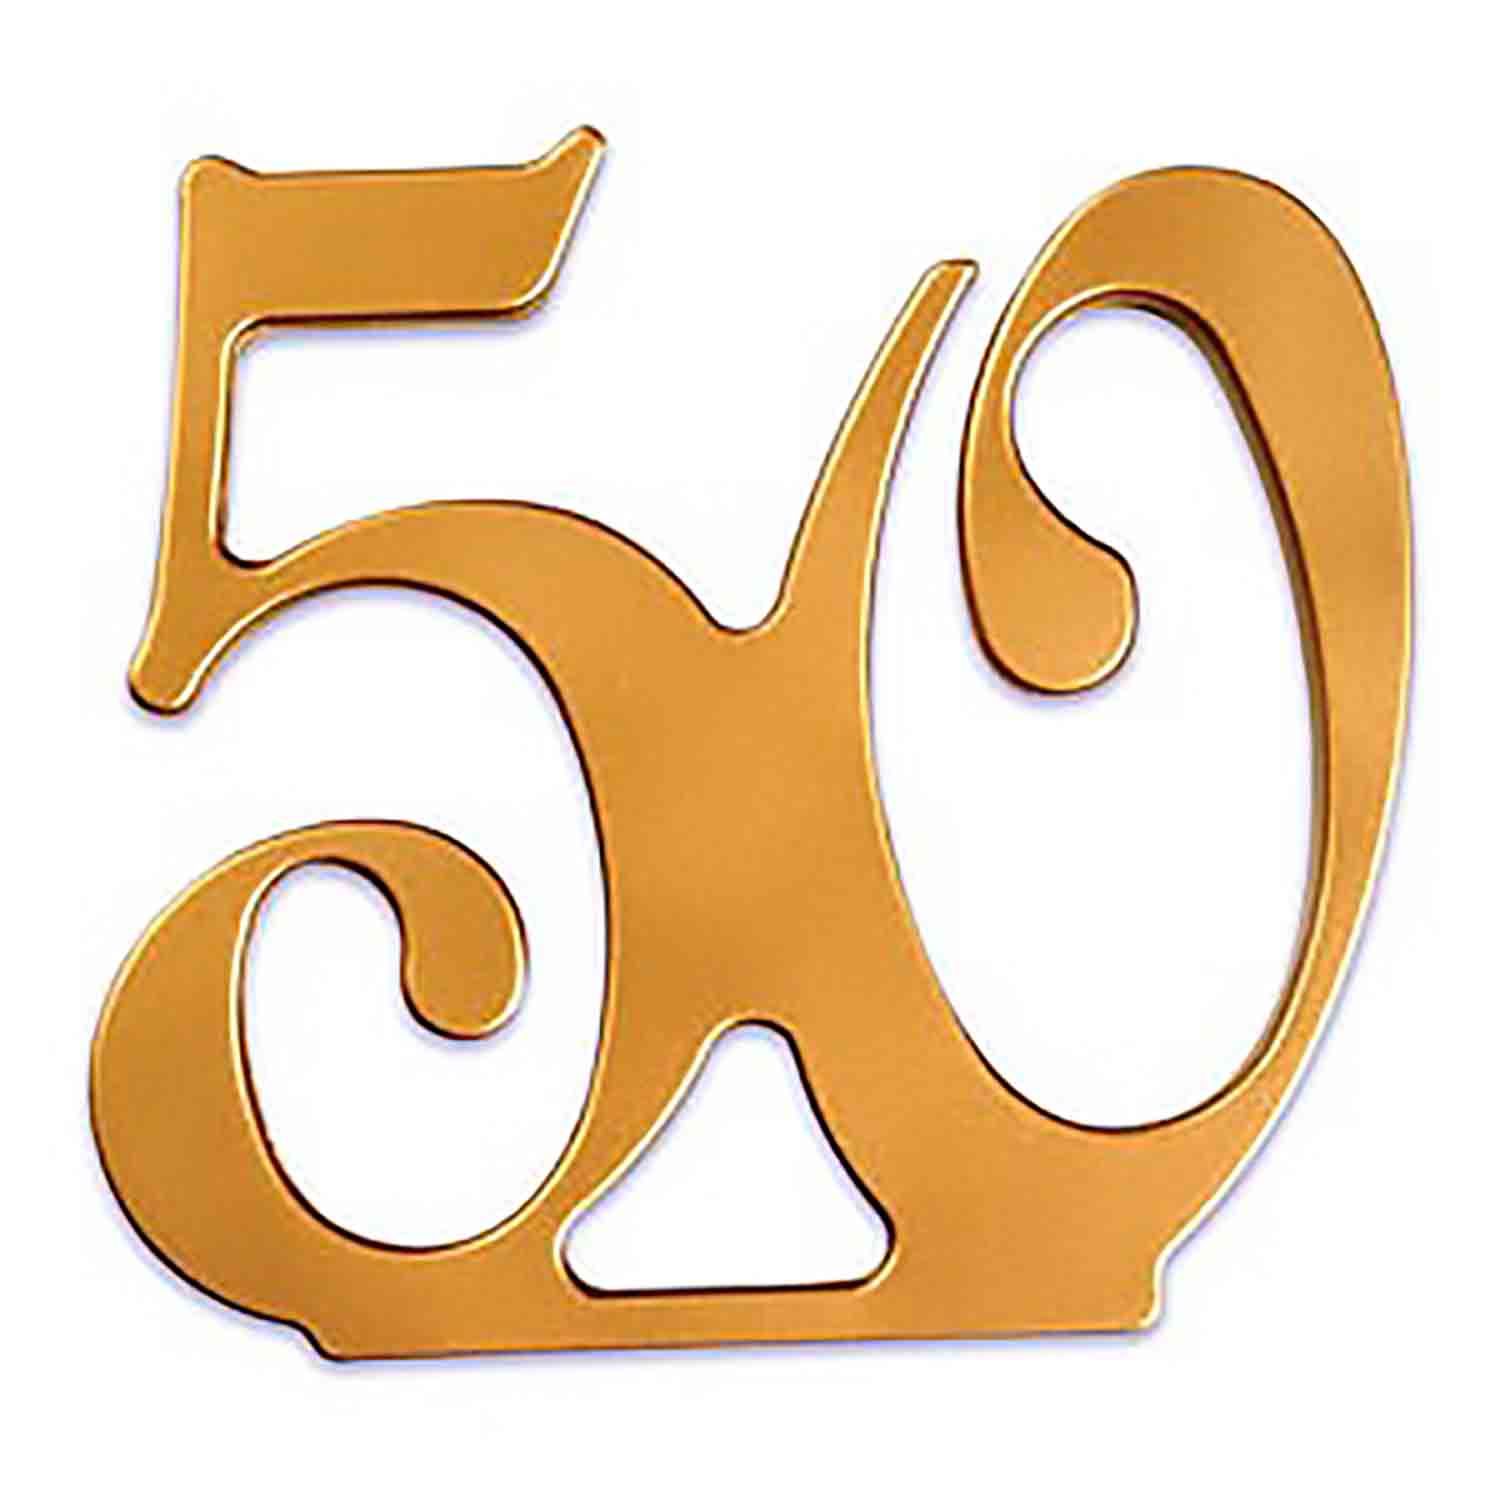 50th Anniversary Cake Topper | Country Kitchen SweetArt